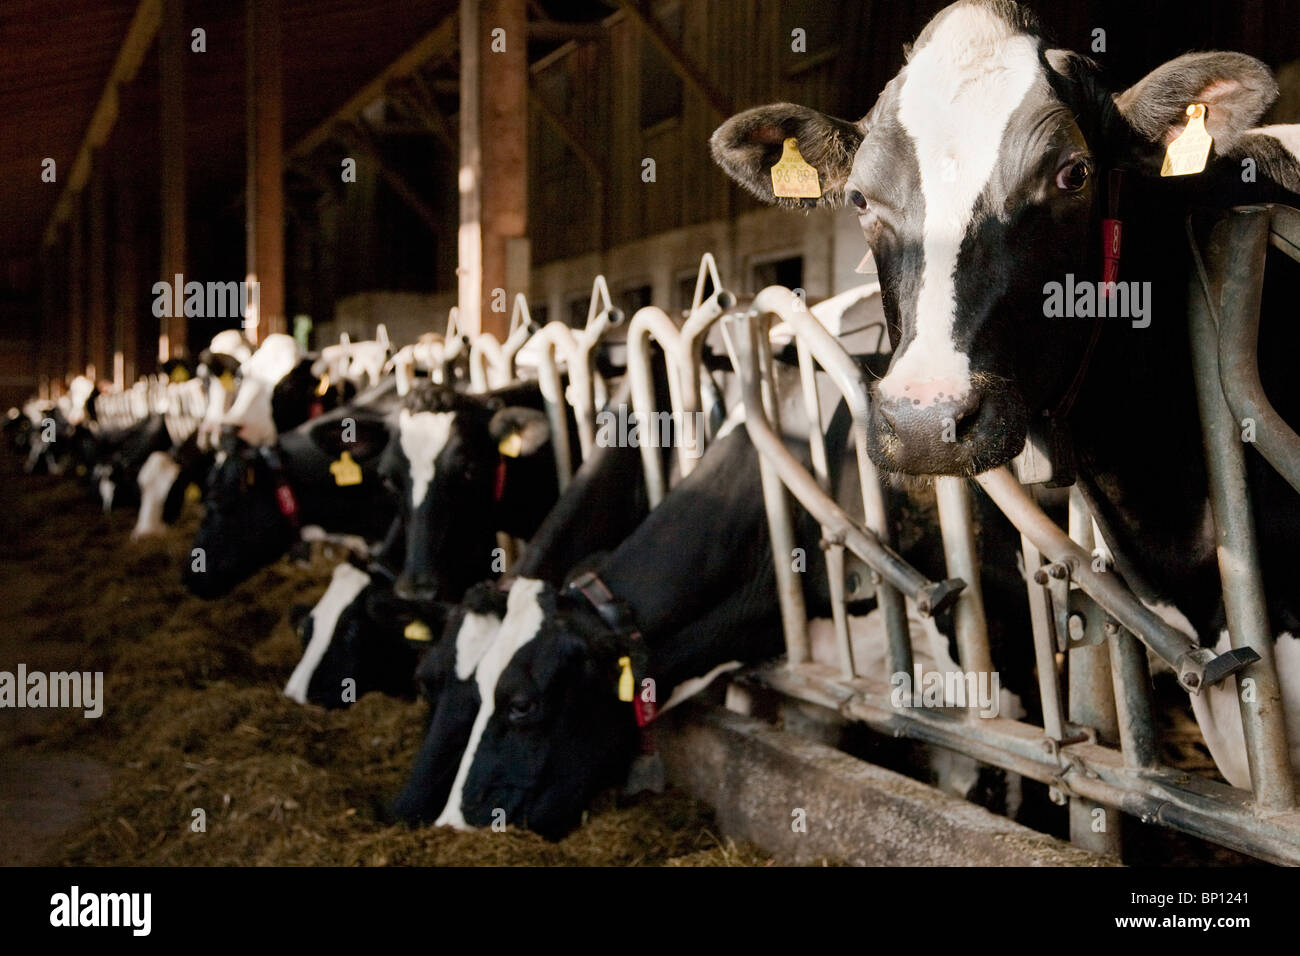 Cows in a stable Stock Photo